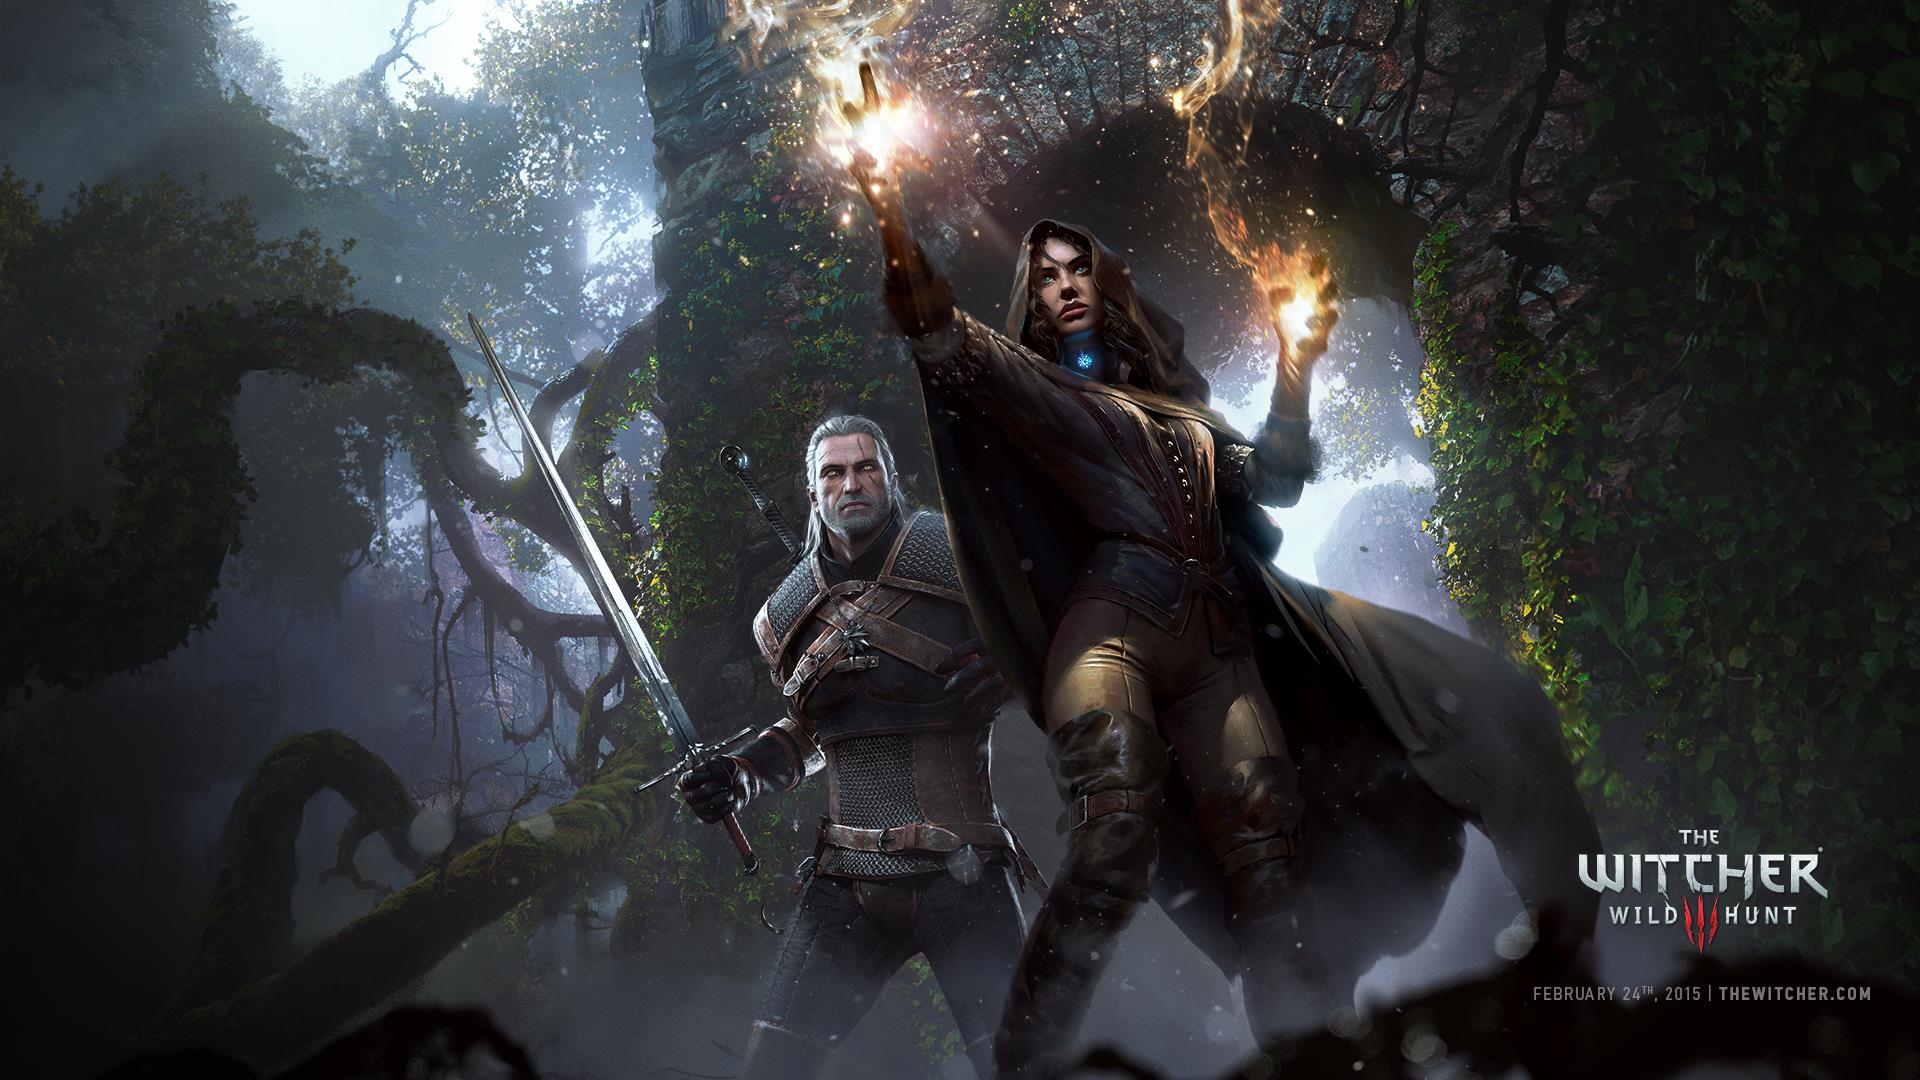  wallpapers for Geralt and Yennefer   The Witcher 3 Wild Hunt Forum 1920x1080